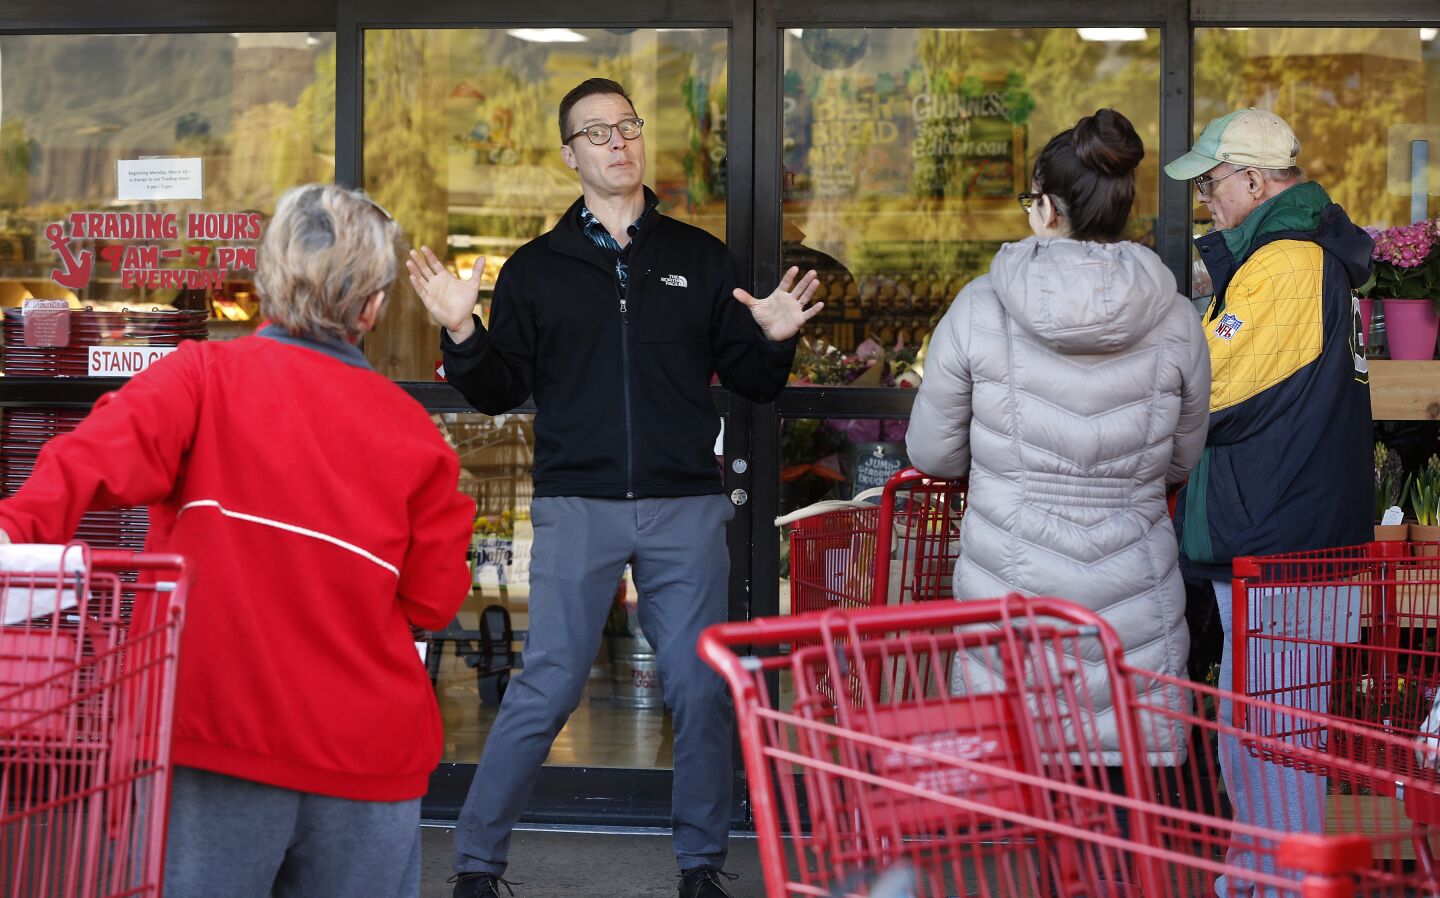 An employee of the Trader Joe's store in Monrovia tells customers waiting in line that it would open doors to everyone at 9 a.m., not just seniors, who arrived believing doors would open earlier to older residents, as some of the people were told by employees and it was reported. Some grocery outlets were offering special morning hours of shopping to accommodate older residents.